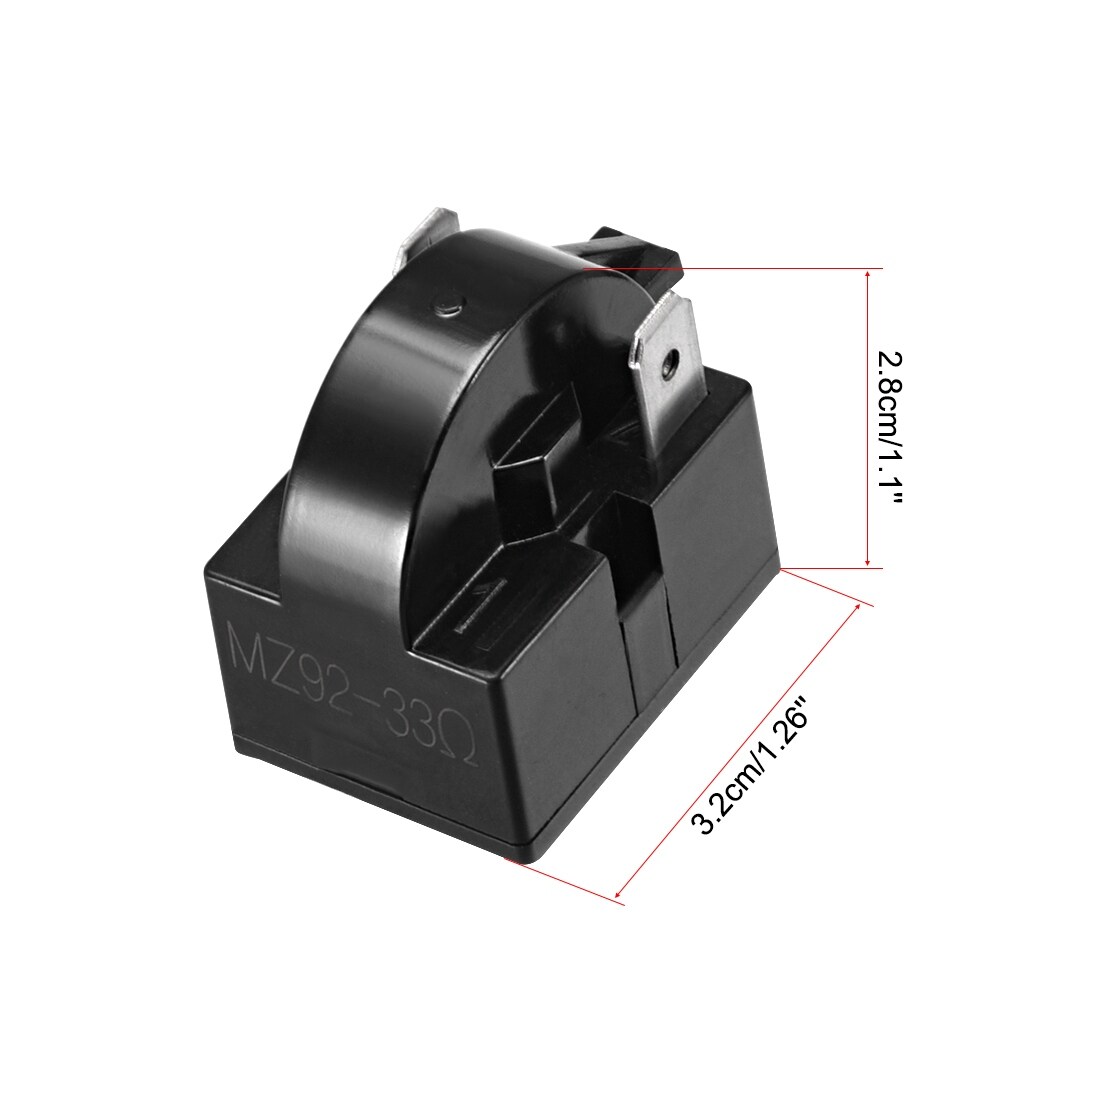 https://ak1.ostkcdn.com/images/products/is/images/direct/64c0cd6a29131df00e9e7fce205bf9fe6ebba866/33-Ohm-2-Pin-Refrigerator-PTC-Starter-Relay-Black.jpg